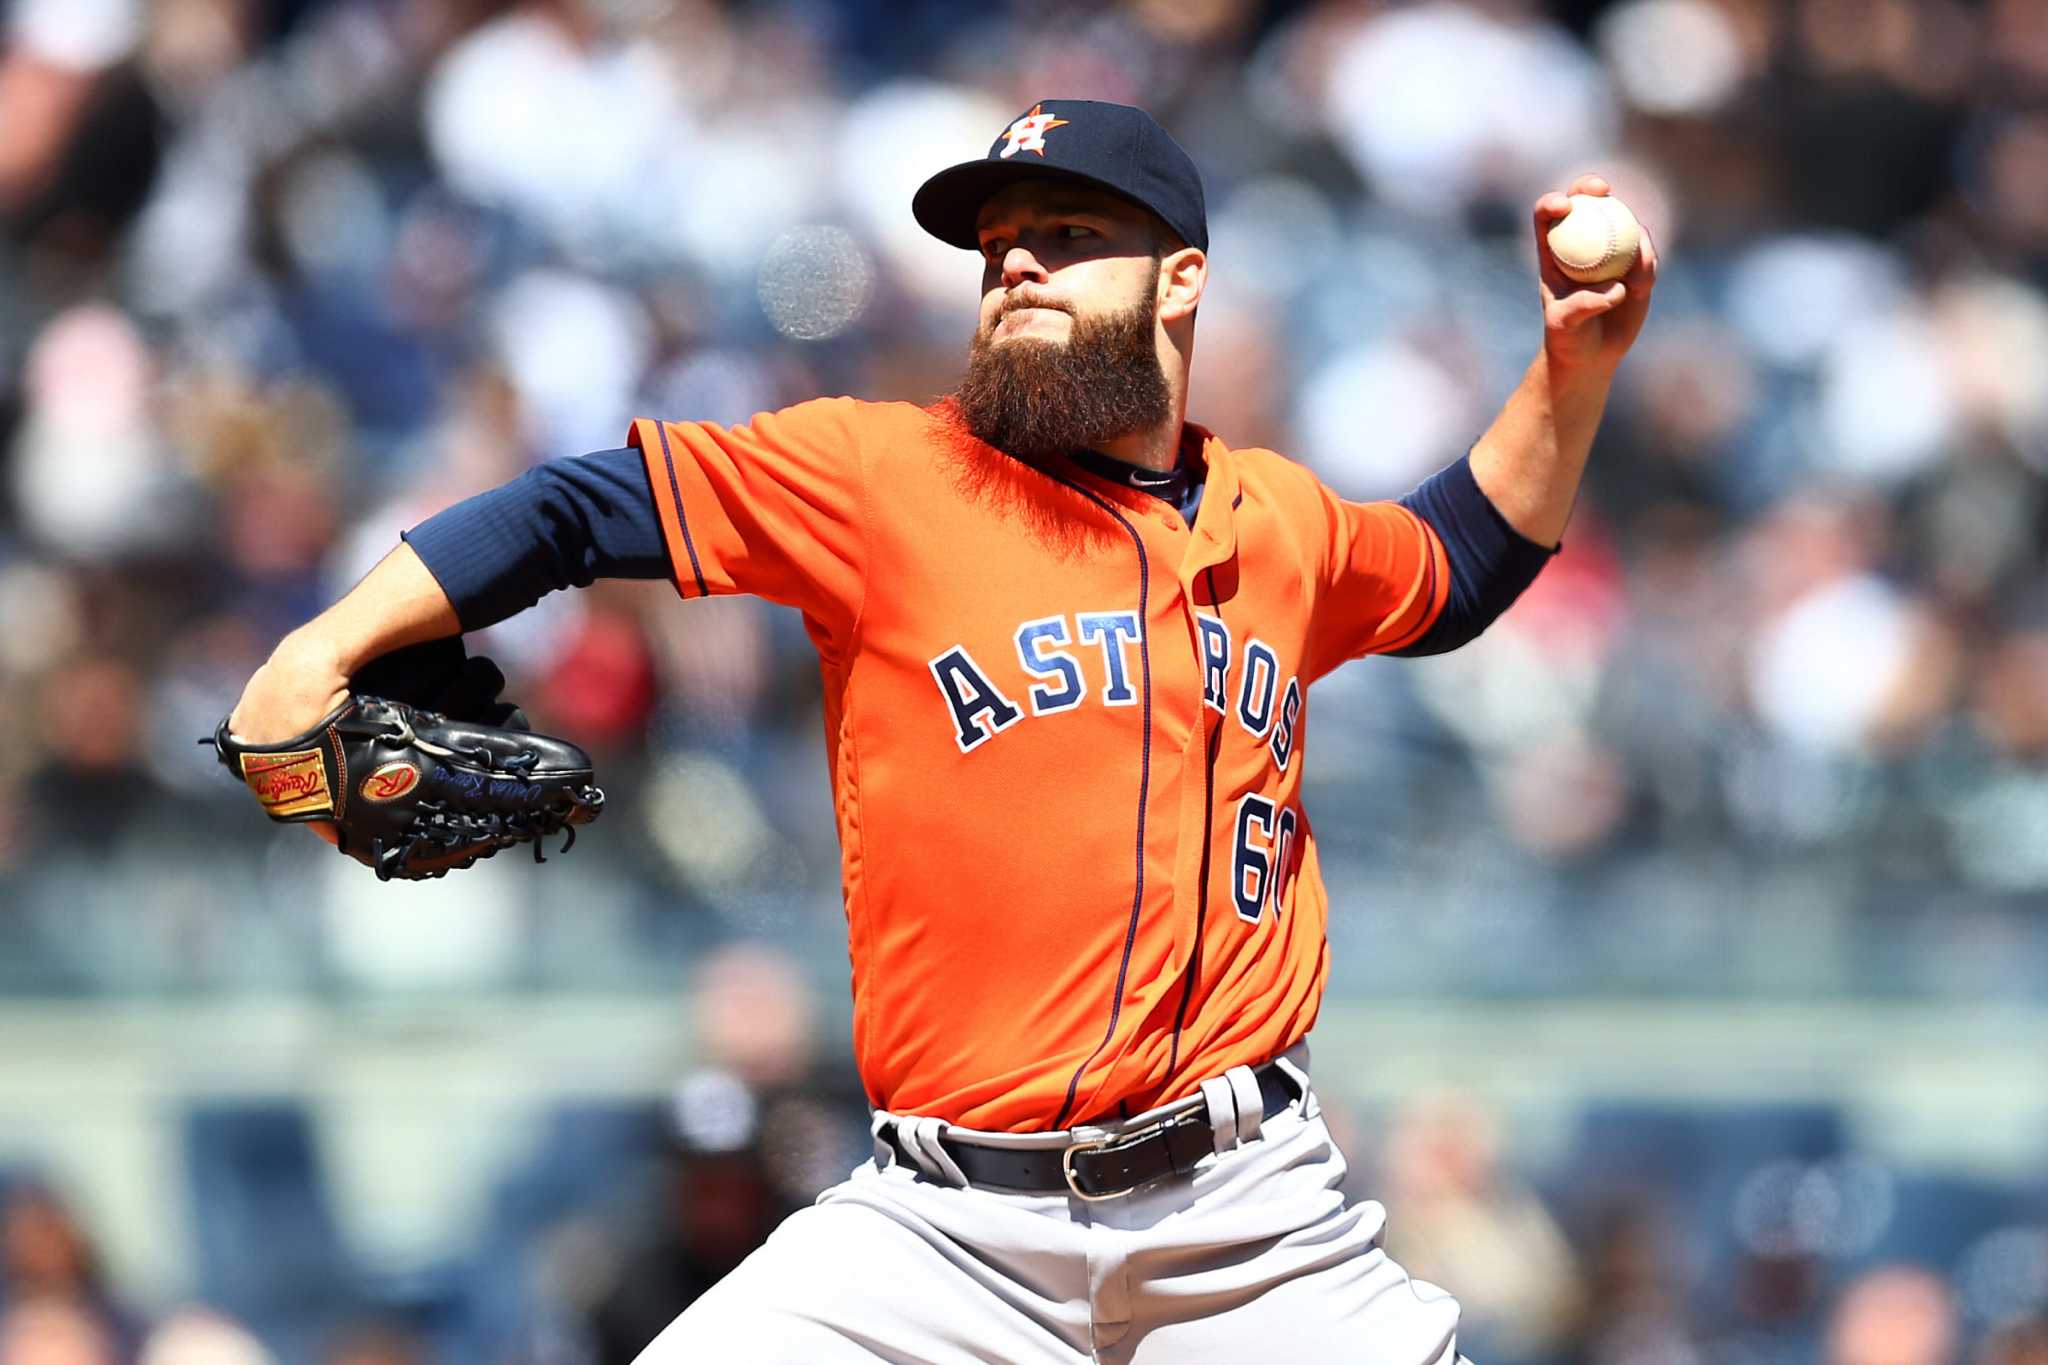 2015 Astros Opening Day Game-Used Jersey: #60 Dallas Keuchel